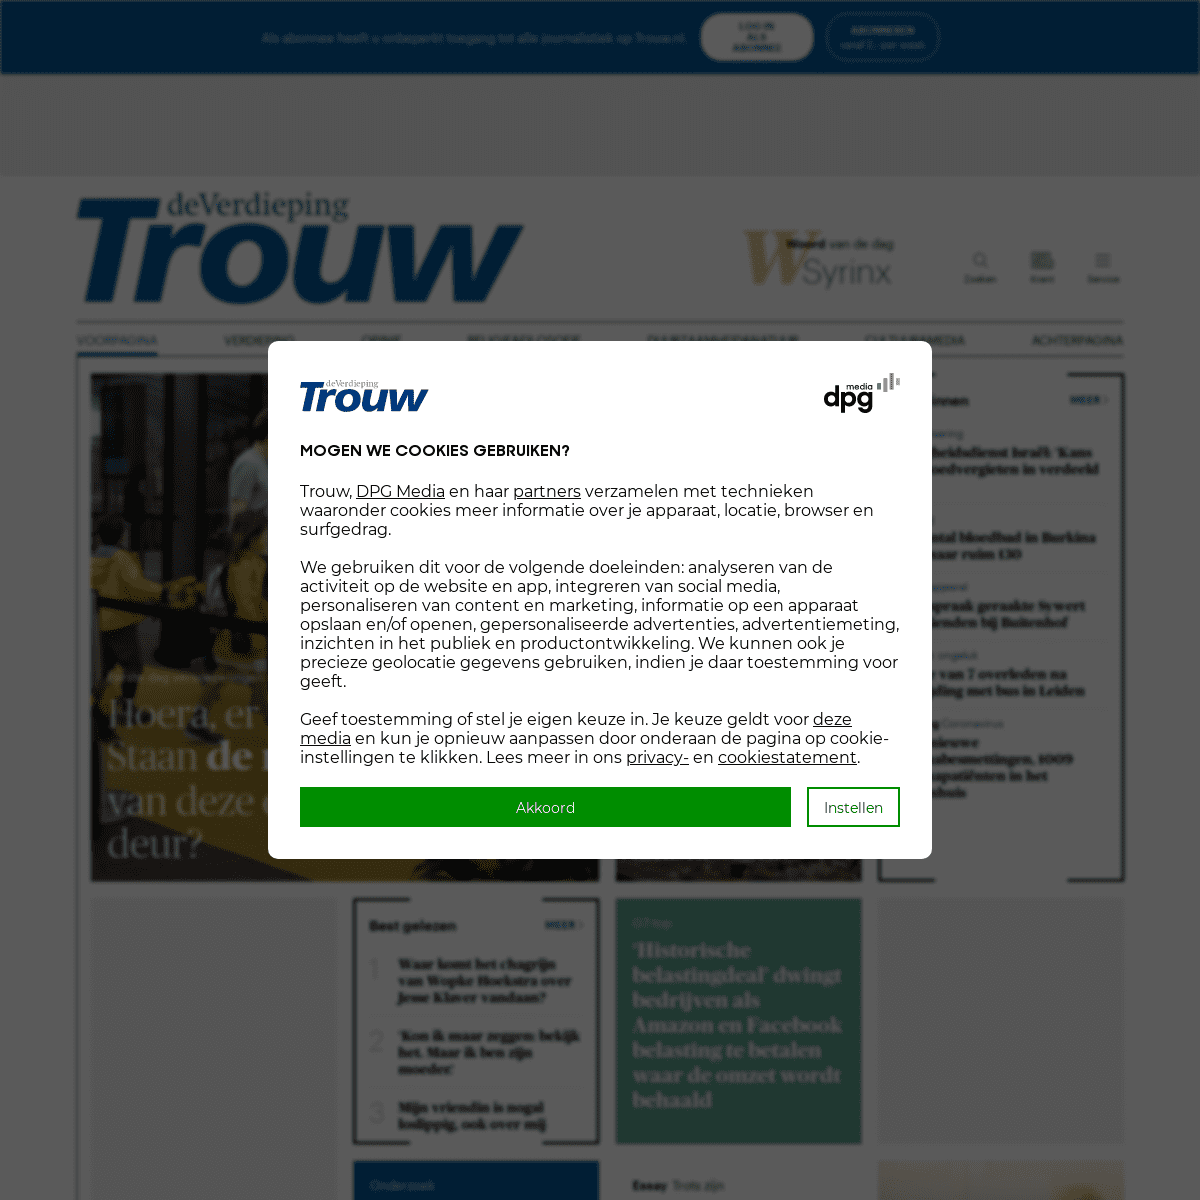 A complete backup of https://trouw.nl